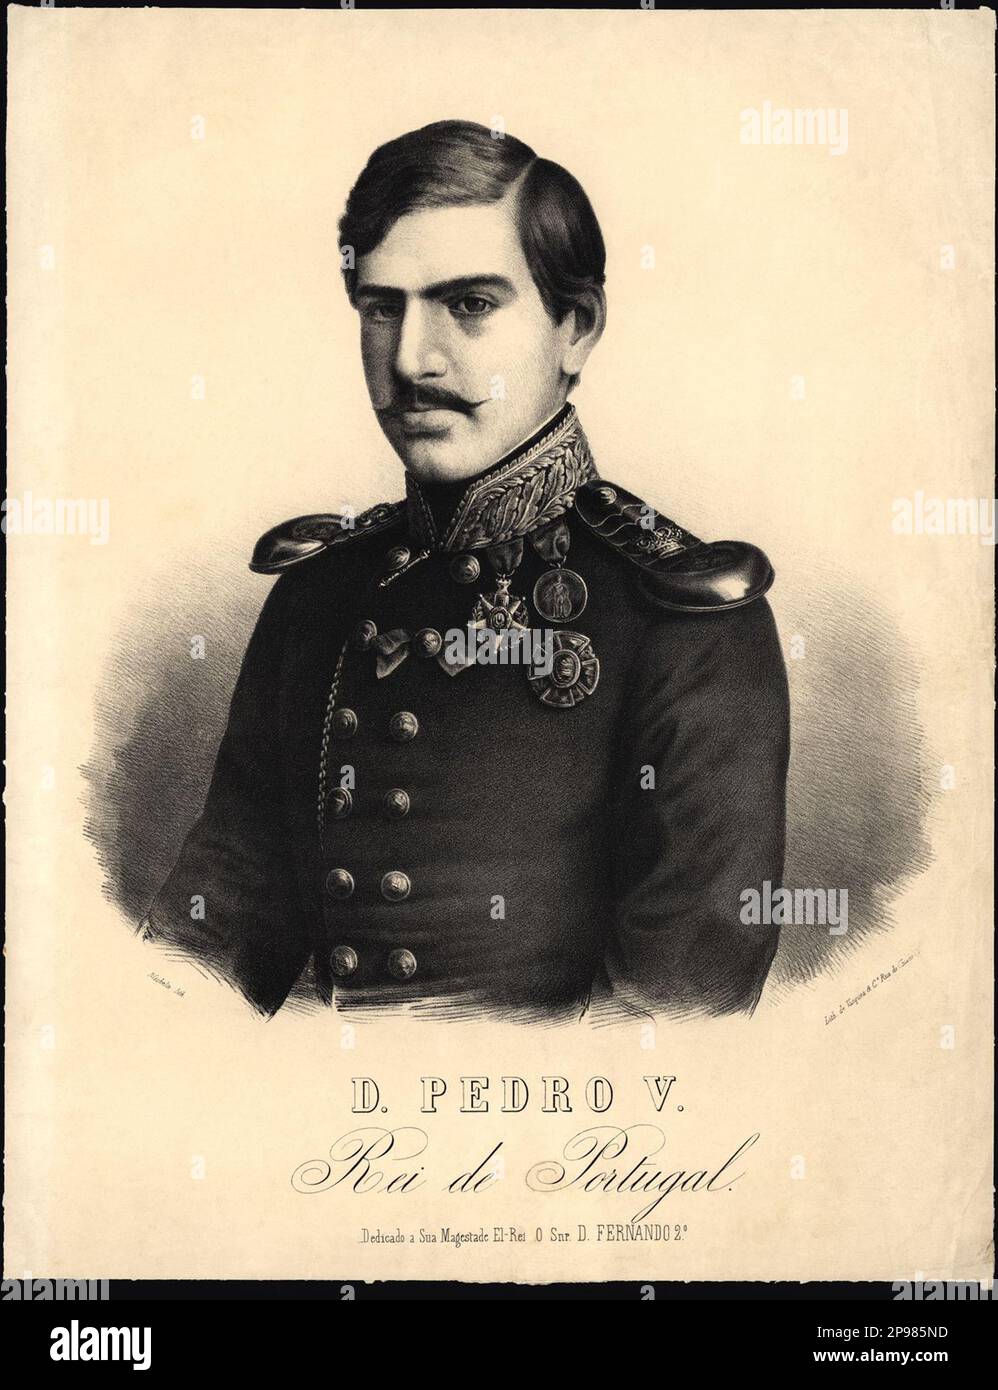 1890 ca., PORTUGAL  : The King of Portugal  Dom PEDRO V ( 1837 - 1861 ) de Saxe-Coburgo-Gotha e Braganca . He was the oldest son of Queen Maria II and her King-Consort Ferdinand II and was born in his mother's reign . However, this was unable to save the life of the young king who died (along with his brother Ferdinand) of cholera in 1861. He was married to Princess Stephanie of Hohenzollern-Sigmaringen, but had no children and the throne then passed to his brother Luis ( King Luis I ) - CASA de BRAGANCA e Habsburgo - BRAGANZA  - PORTOGALLO  -  REALI - Nobiltà    - NOBILITY - ROYALTY - HISTORY Stock Photo